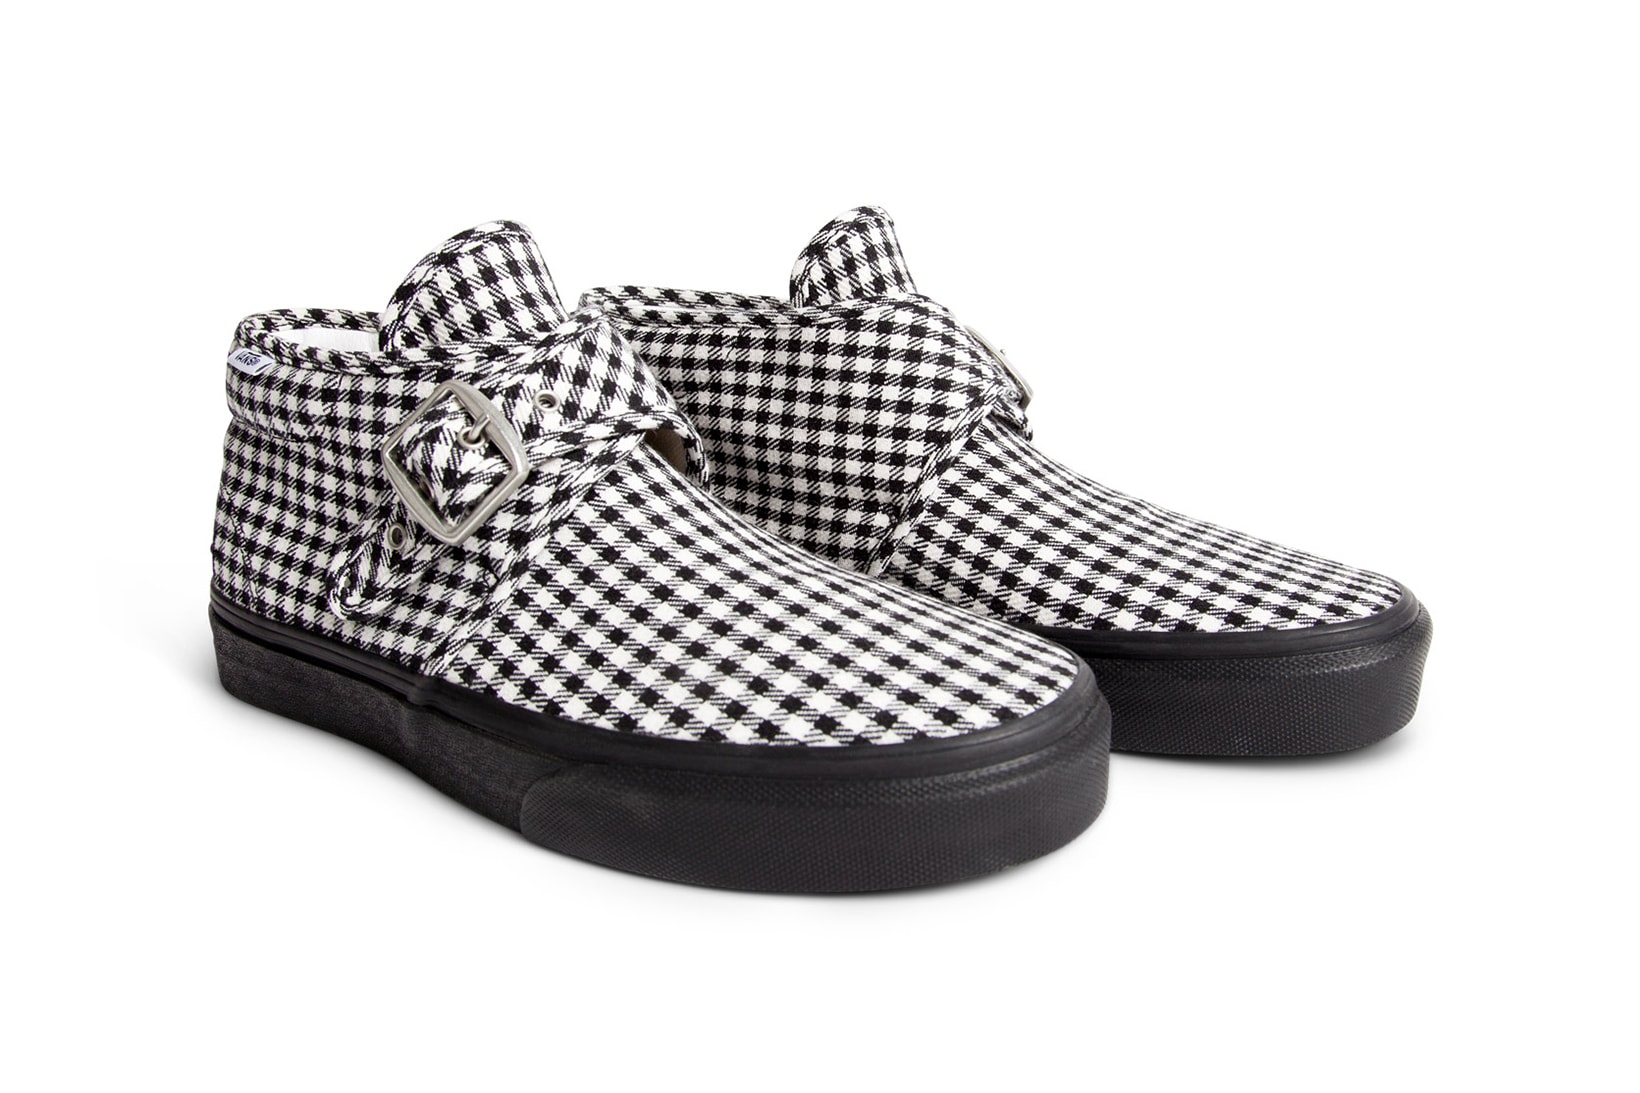 vans noah sneakers style 47 collaboration fall winter 